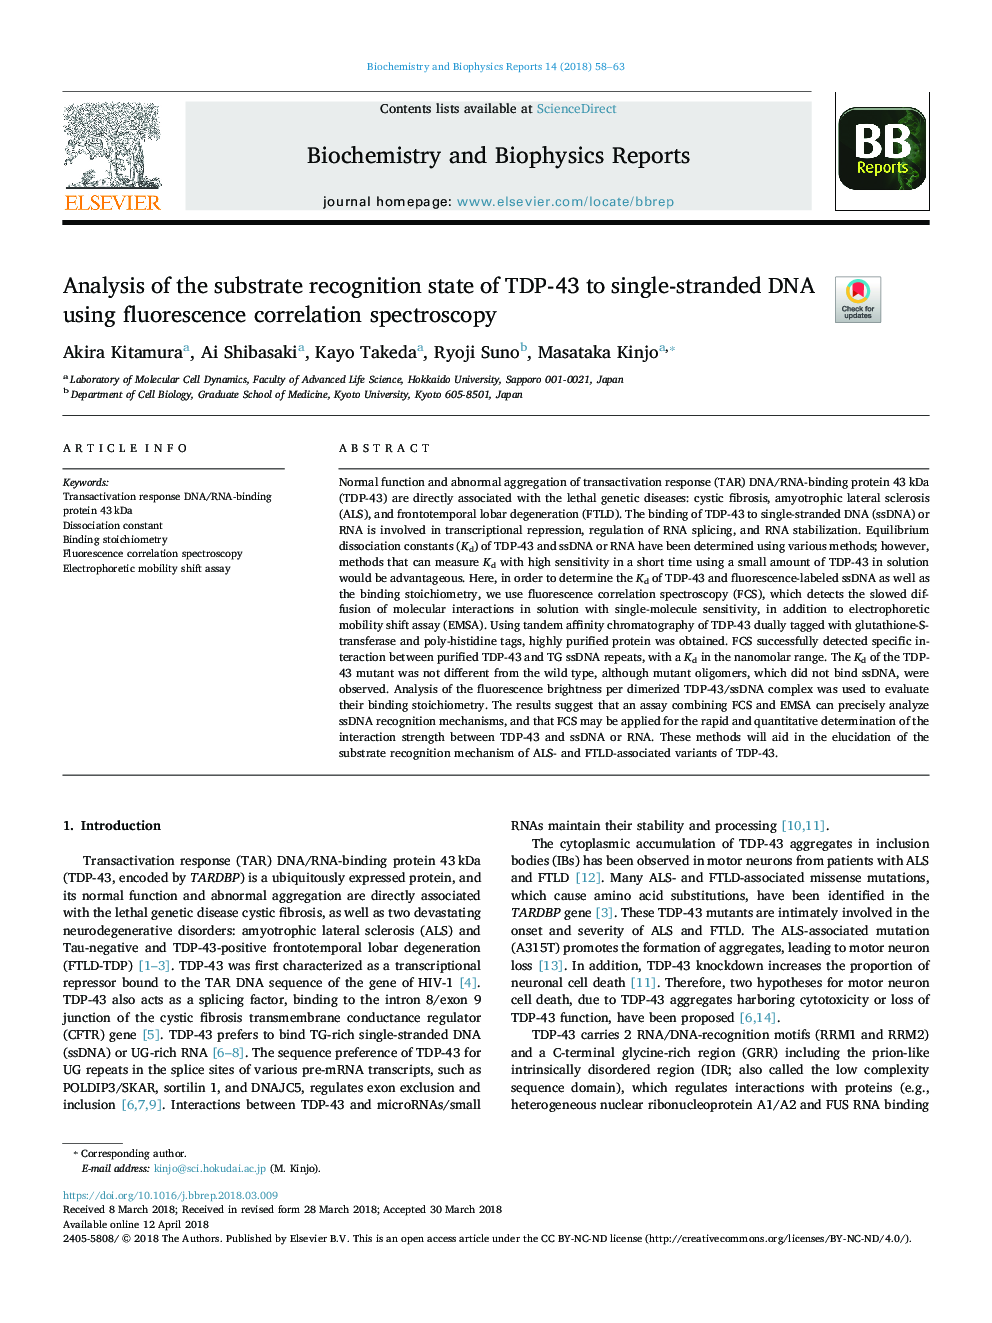 Analysis of the substrate recognition state of TDP-43 to single-stranded DNA using fluorescence correlation spectroscopy